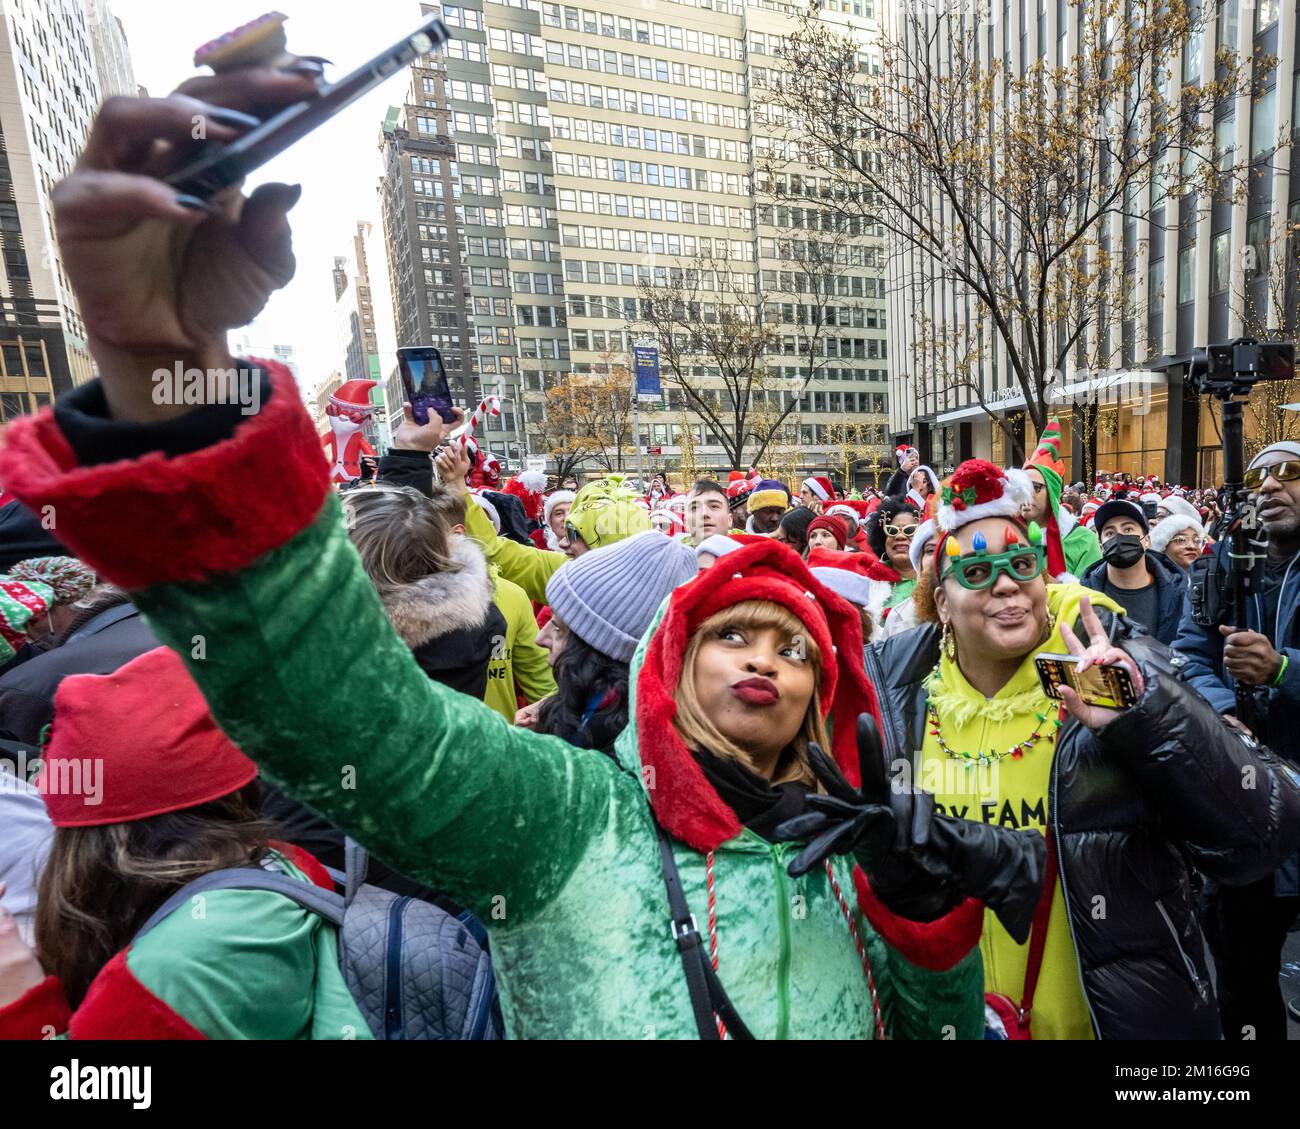 New York, USA. 10th Dec, 2022. Revelers dressed as Santa Claus have fun near Times Square during the annual SantaCon in New York City. Credit: Enrique Shore/Alamy Live News Stock Photo